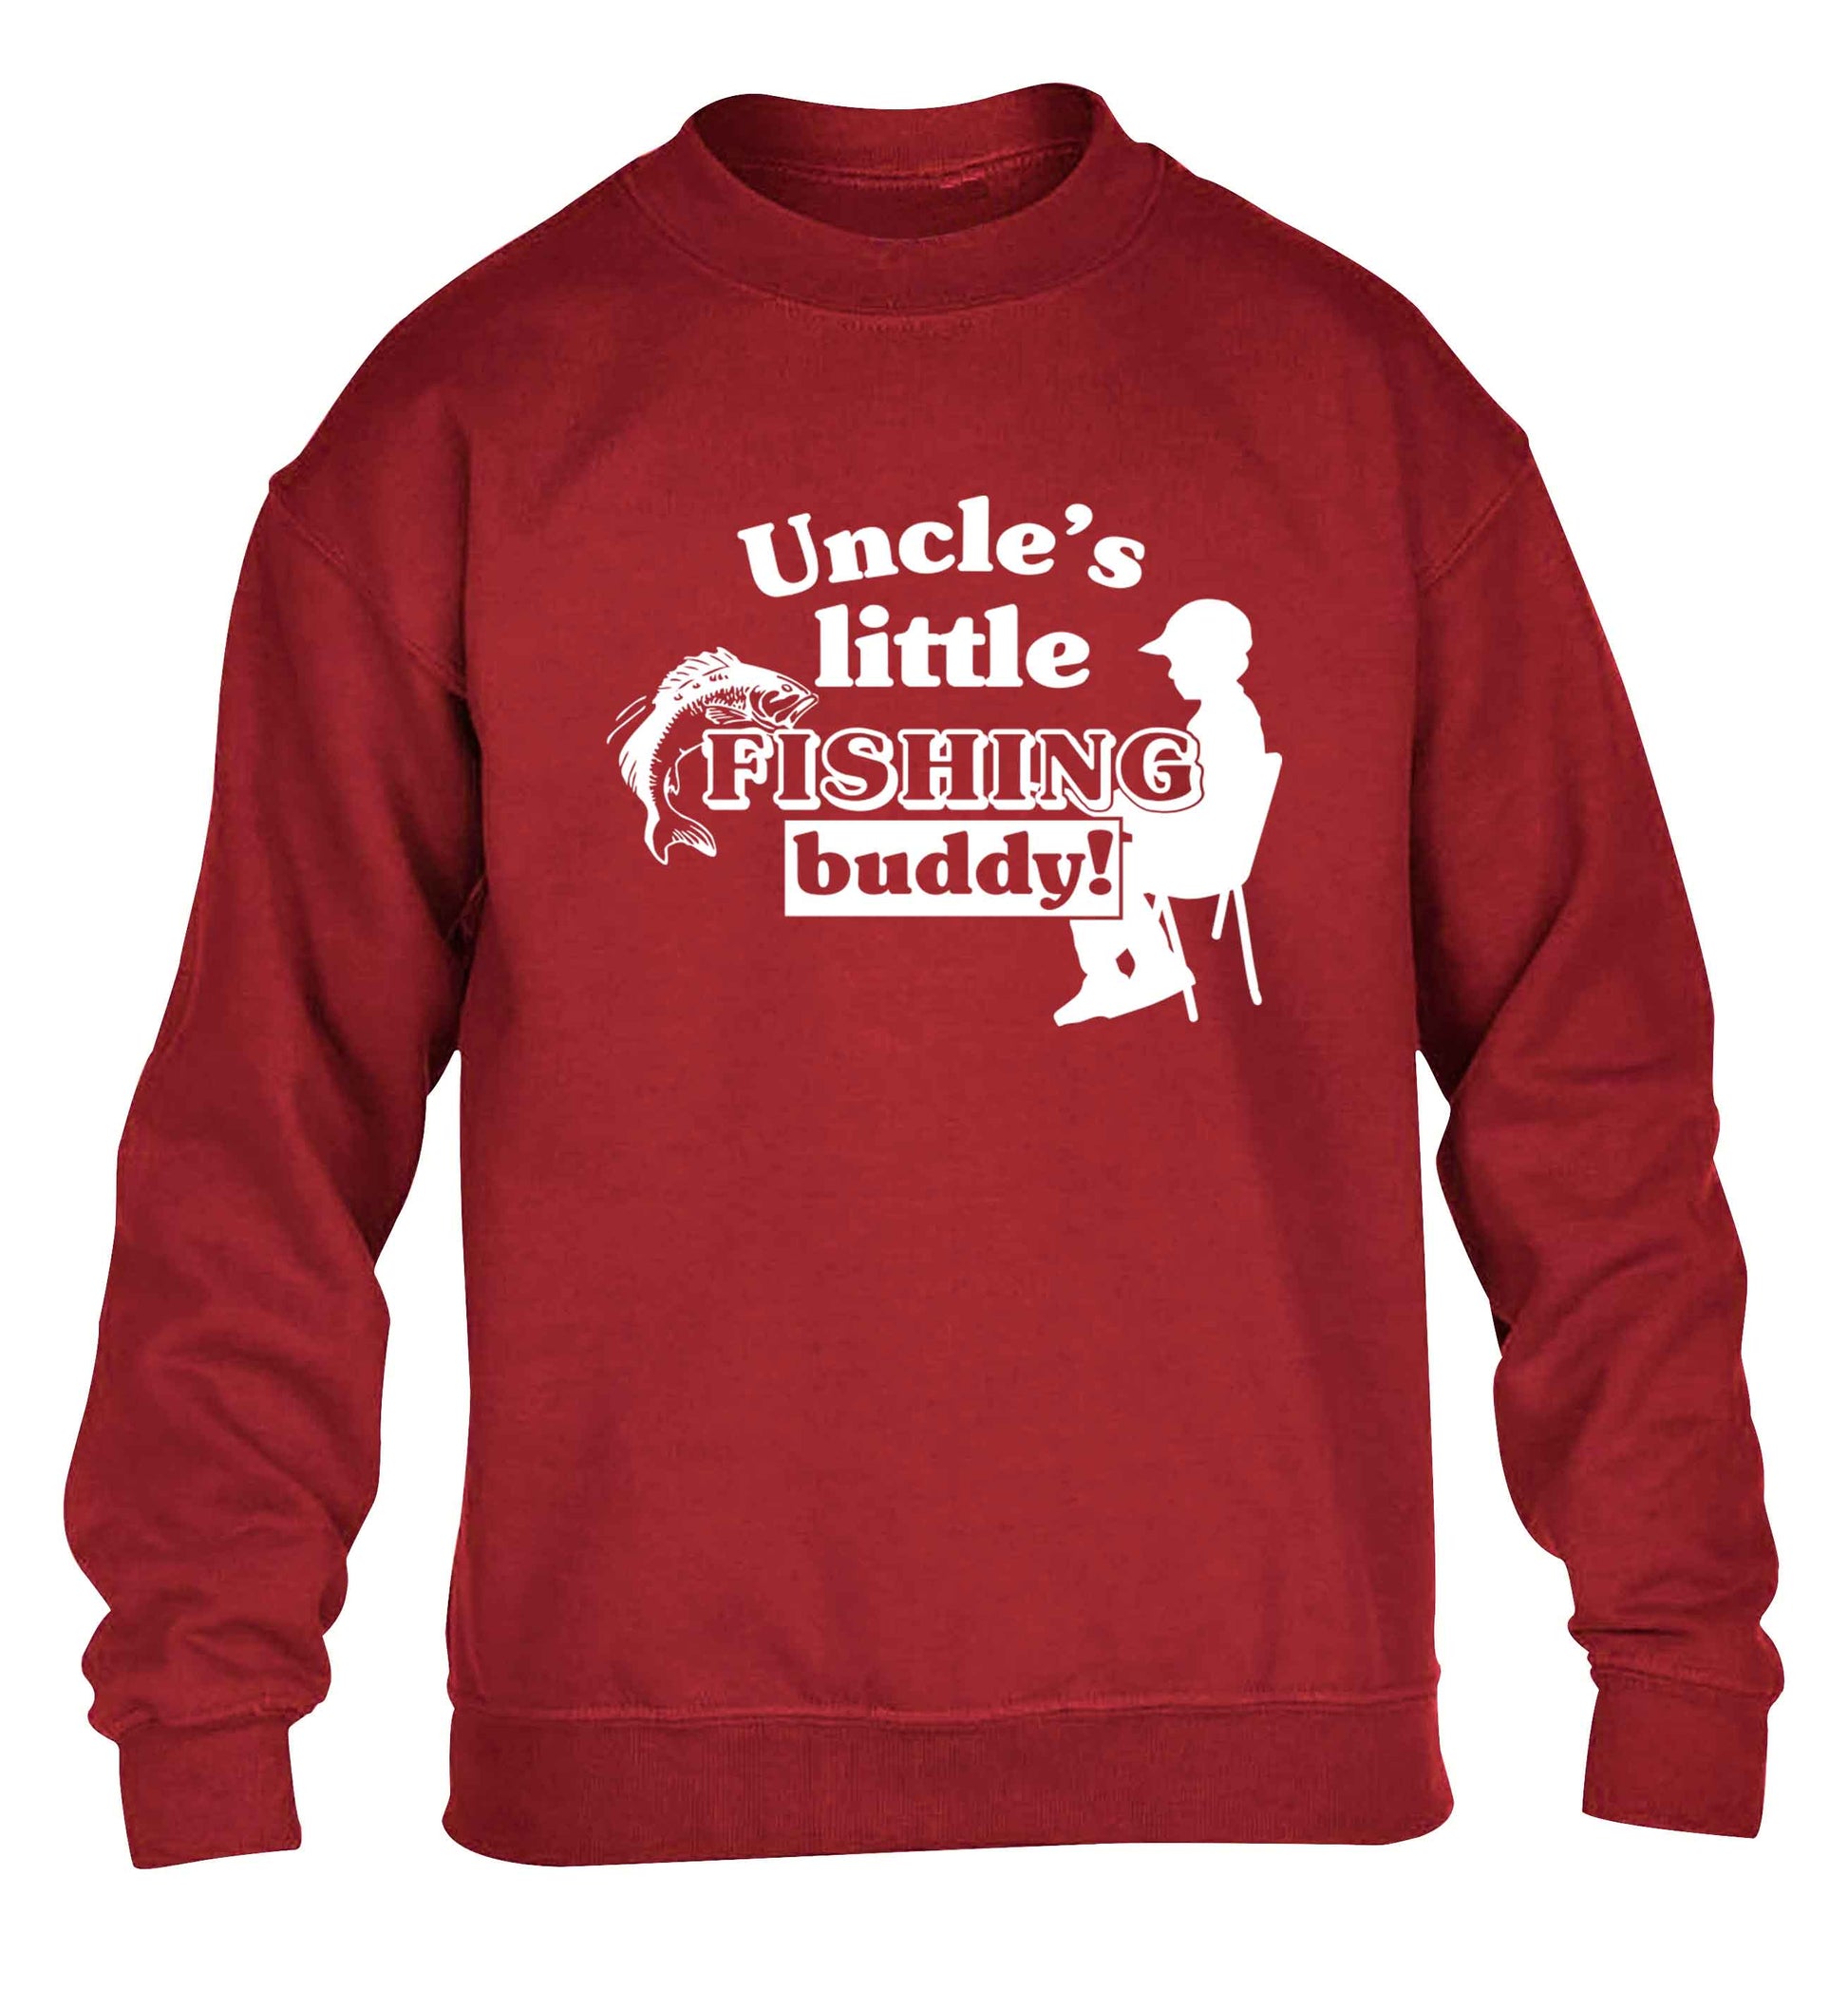 Uncle's little fishing buddy children's grey sweater 12-13 Years